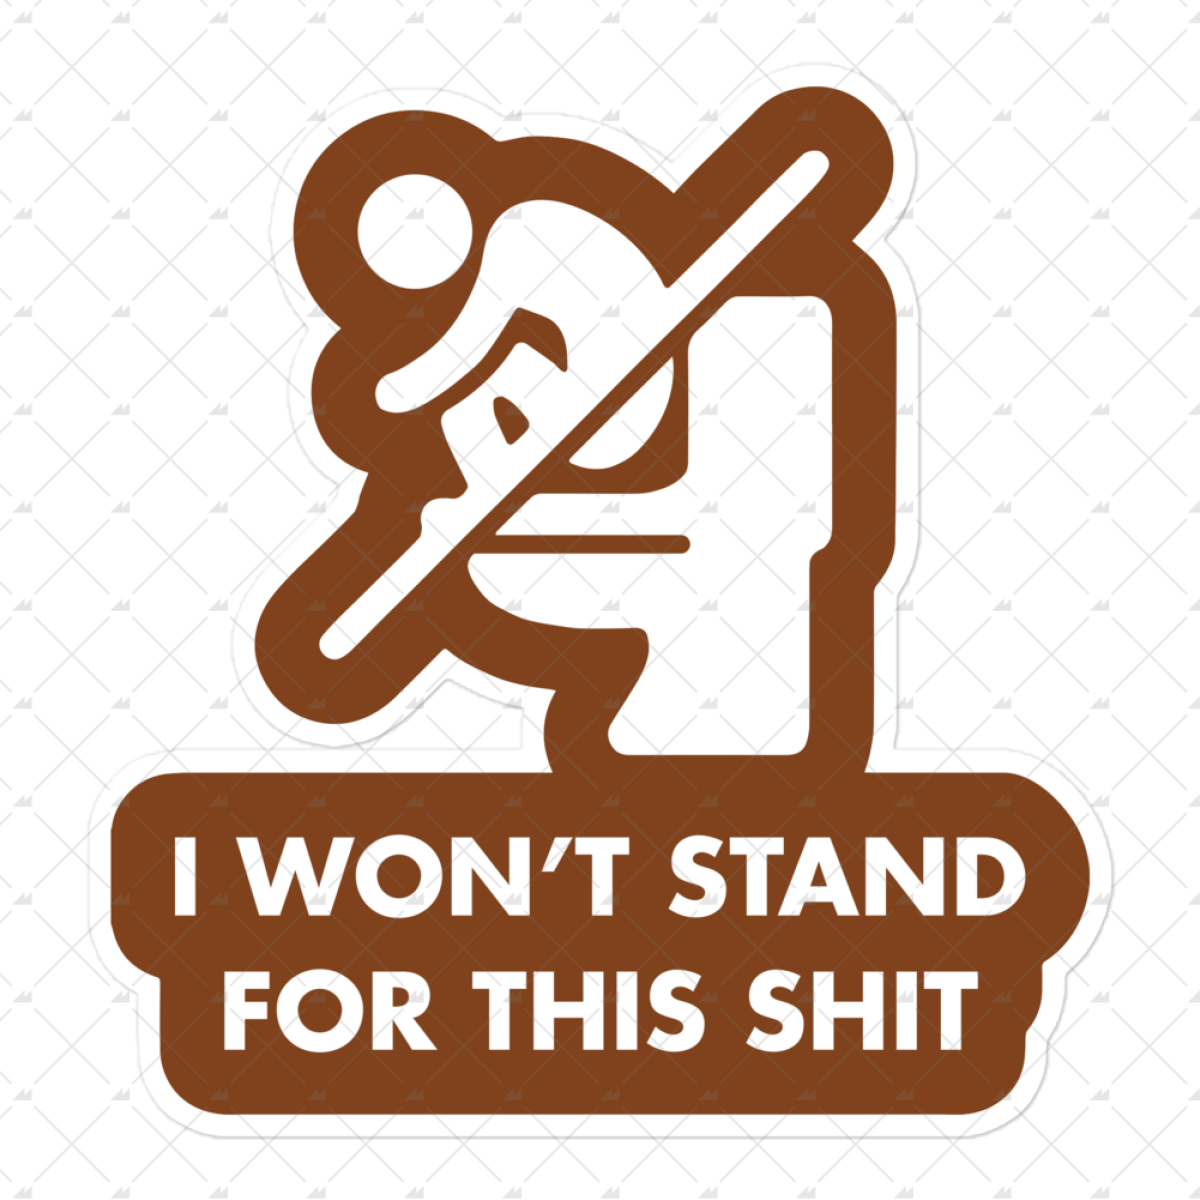 I Won't Stand For This Shit - Sticker